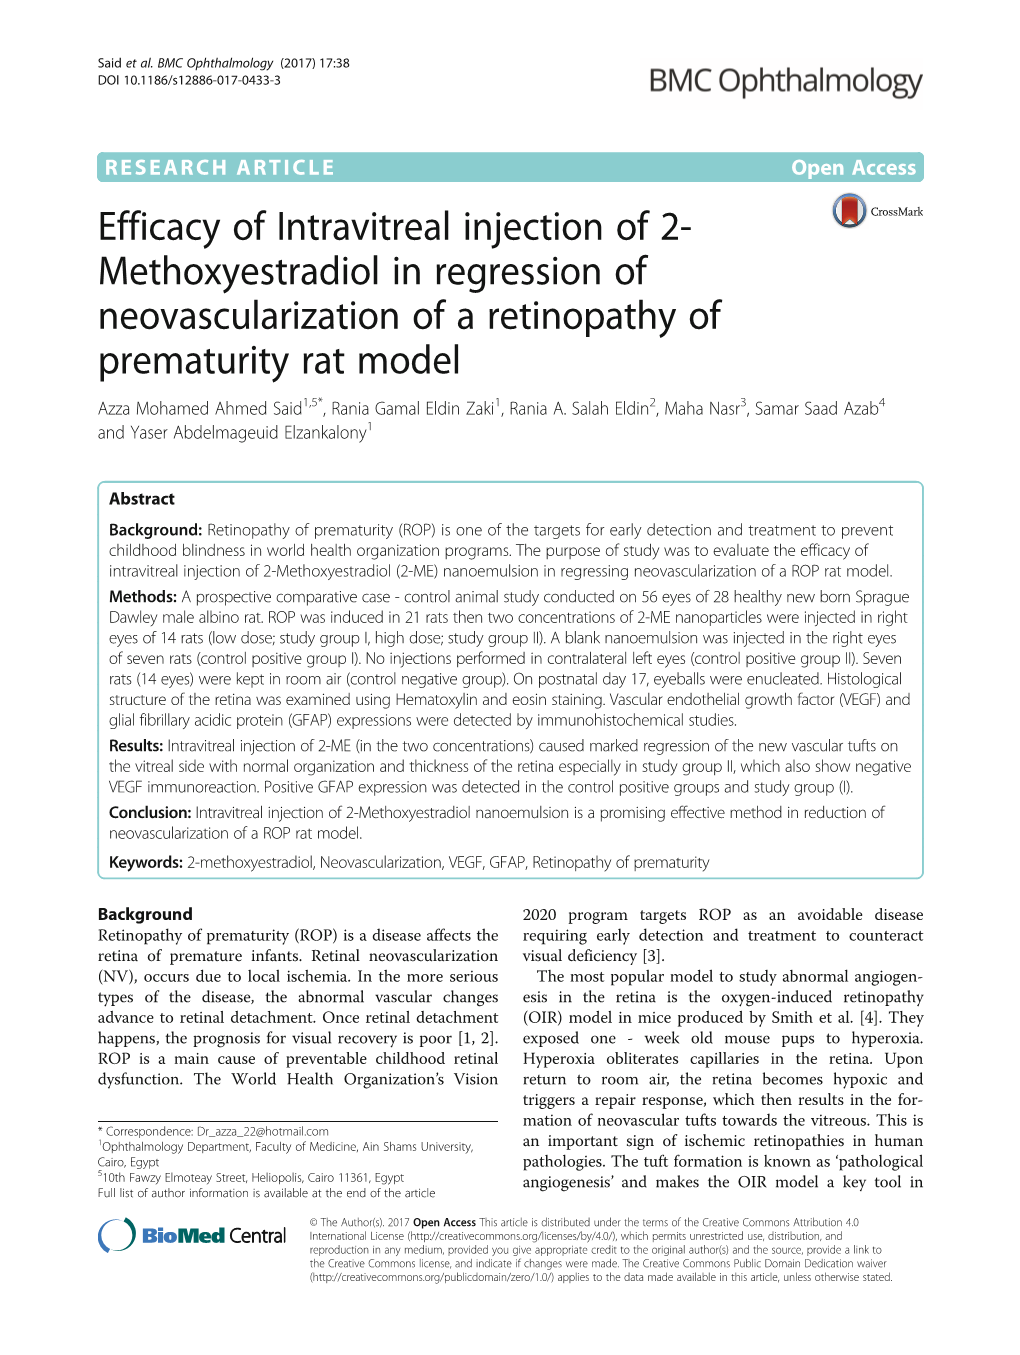 Efficacy of Intravitreal Injection of 2-Methoxyestradiol in Regression of Neovascularization of a Retinopathy of Prematurity